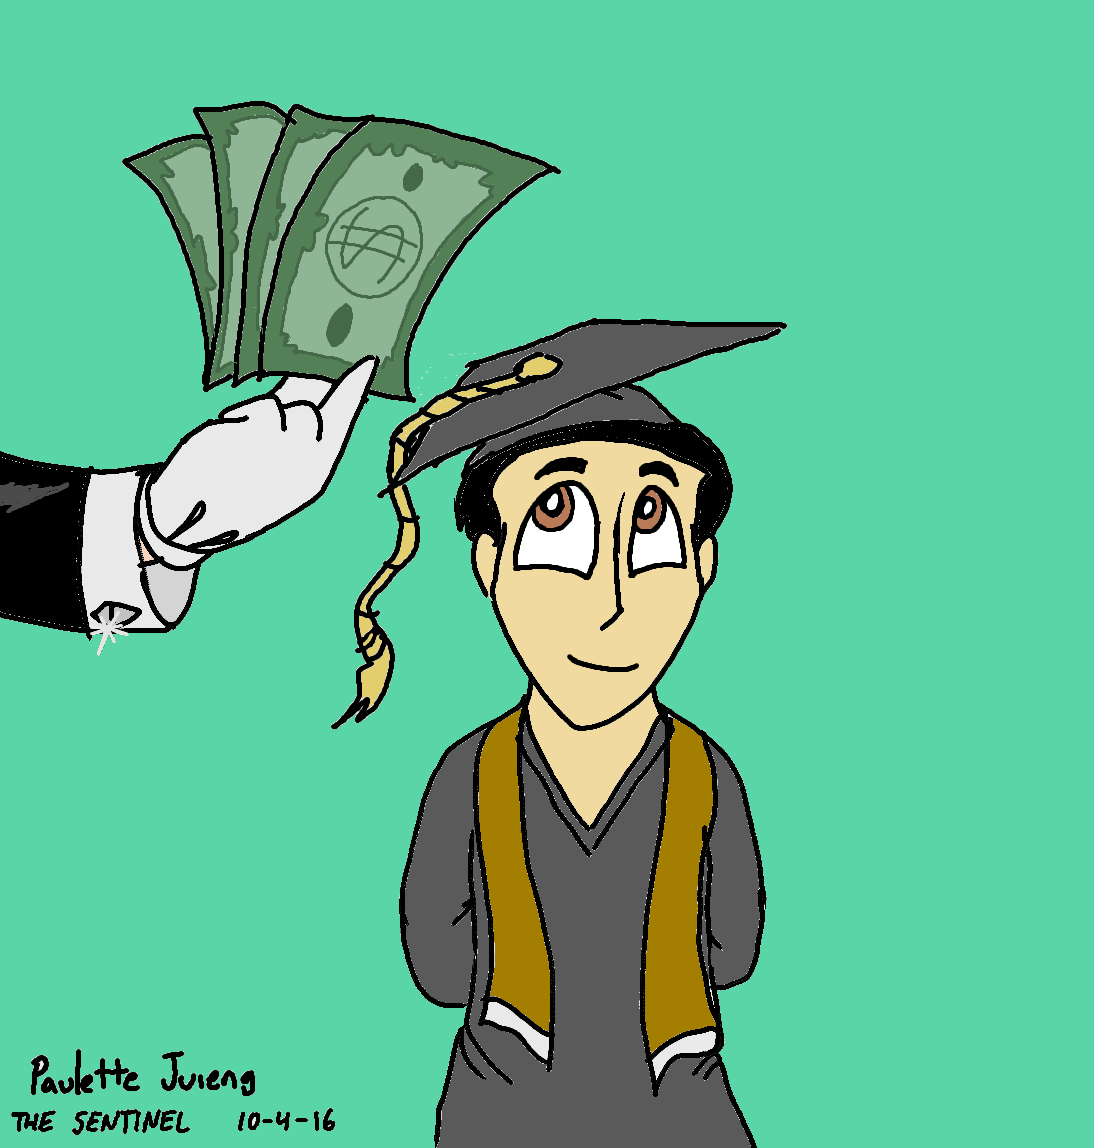 Opinion: We can make college tuition disappear